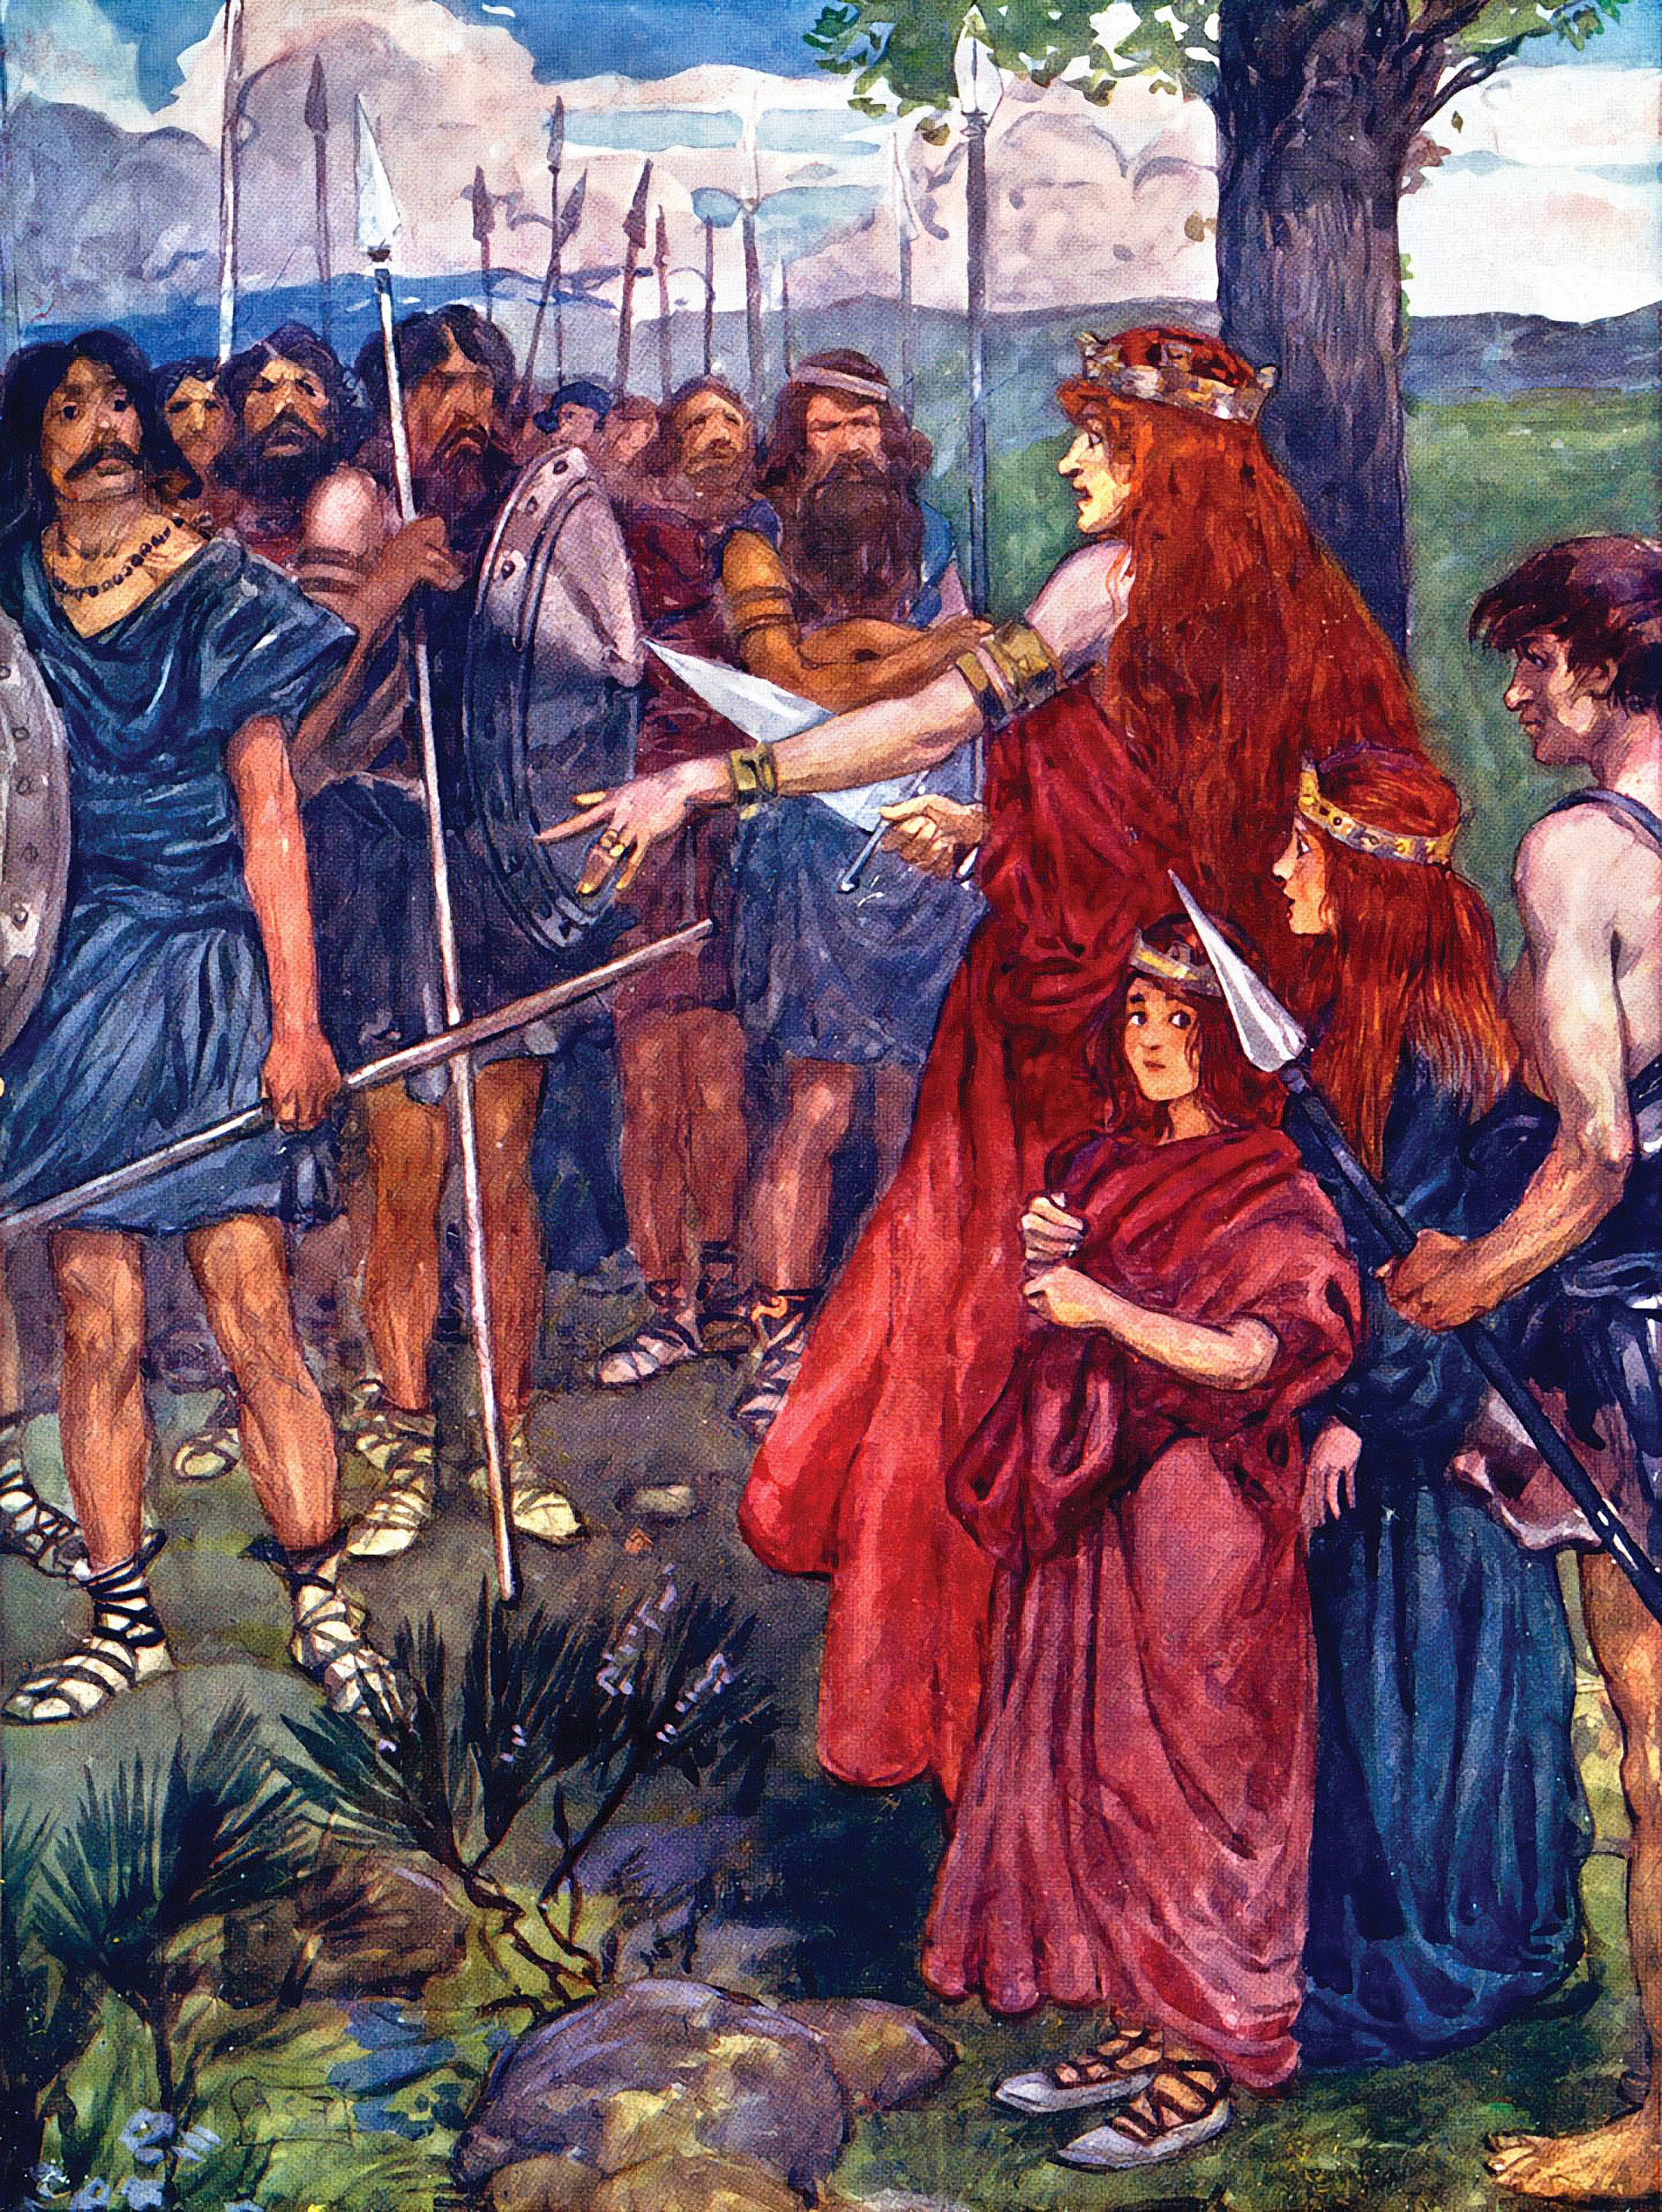 Queen Boudicca summons her fellow Britons to rebel against the Romans. She told them that the Romans’ helmets, breastplates, and greaves, as well as their walls and tents, only showed their fear and their weakness to the elements.